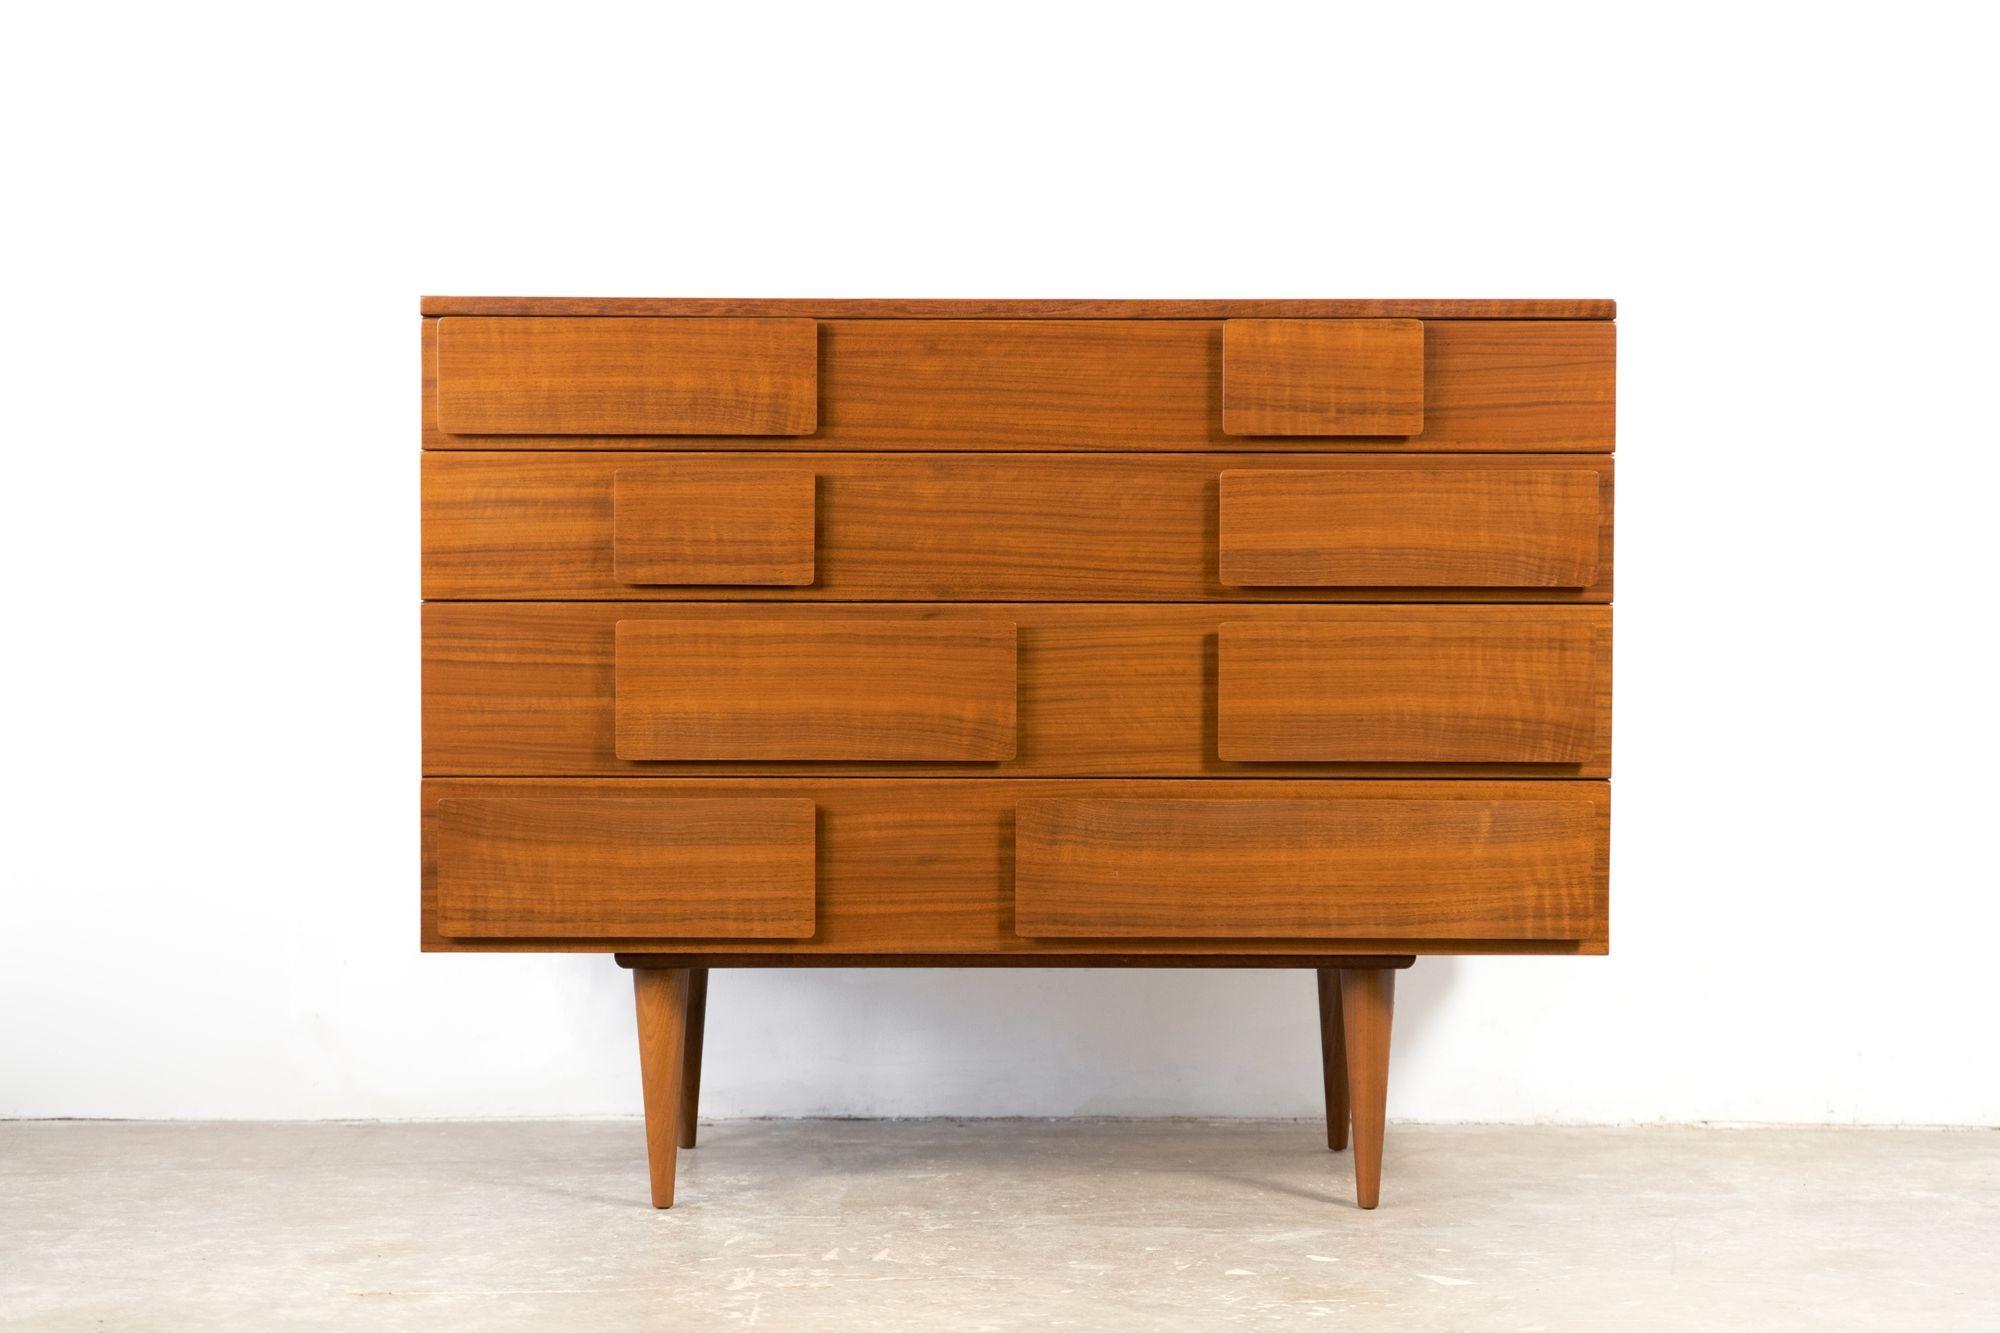 Beautiful crafted four-drawer dresser by Gio Ponti, model 2129 for Singer & Sons, Italy / USA. Dresser is in excellent restored condition constructed from Italian walnut c. 1950.